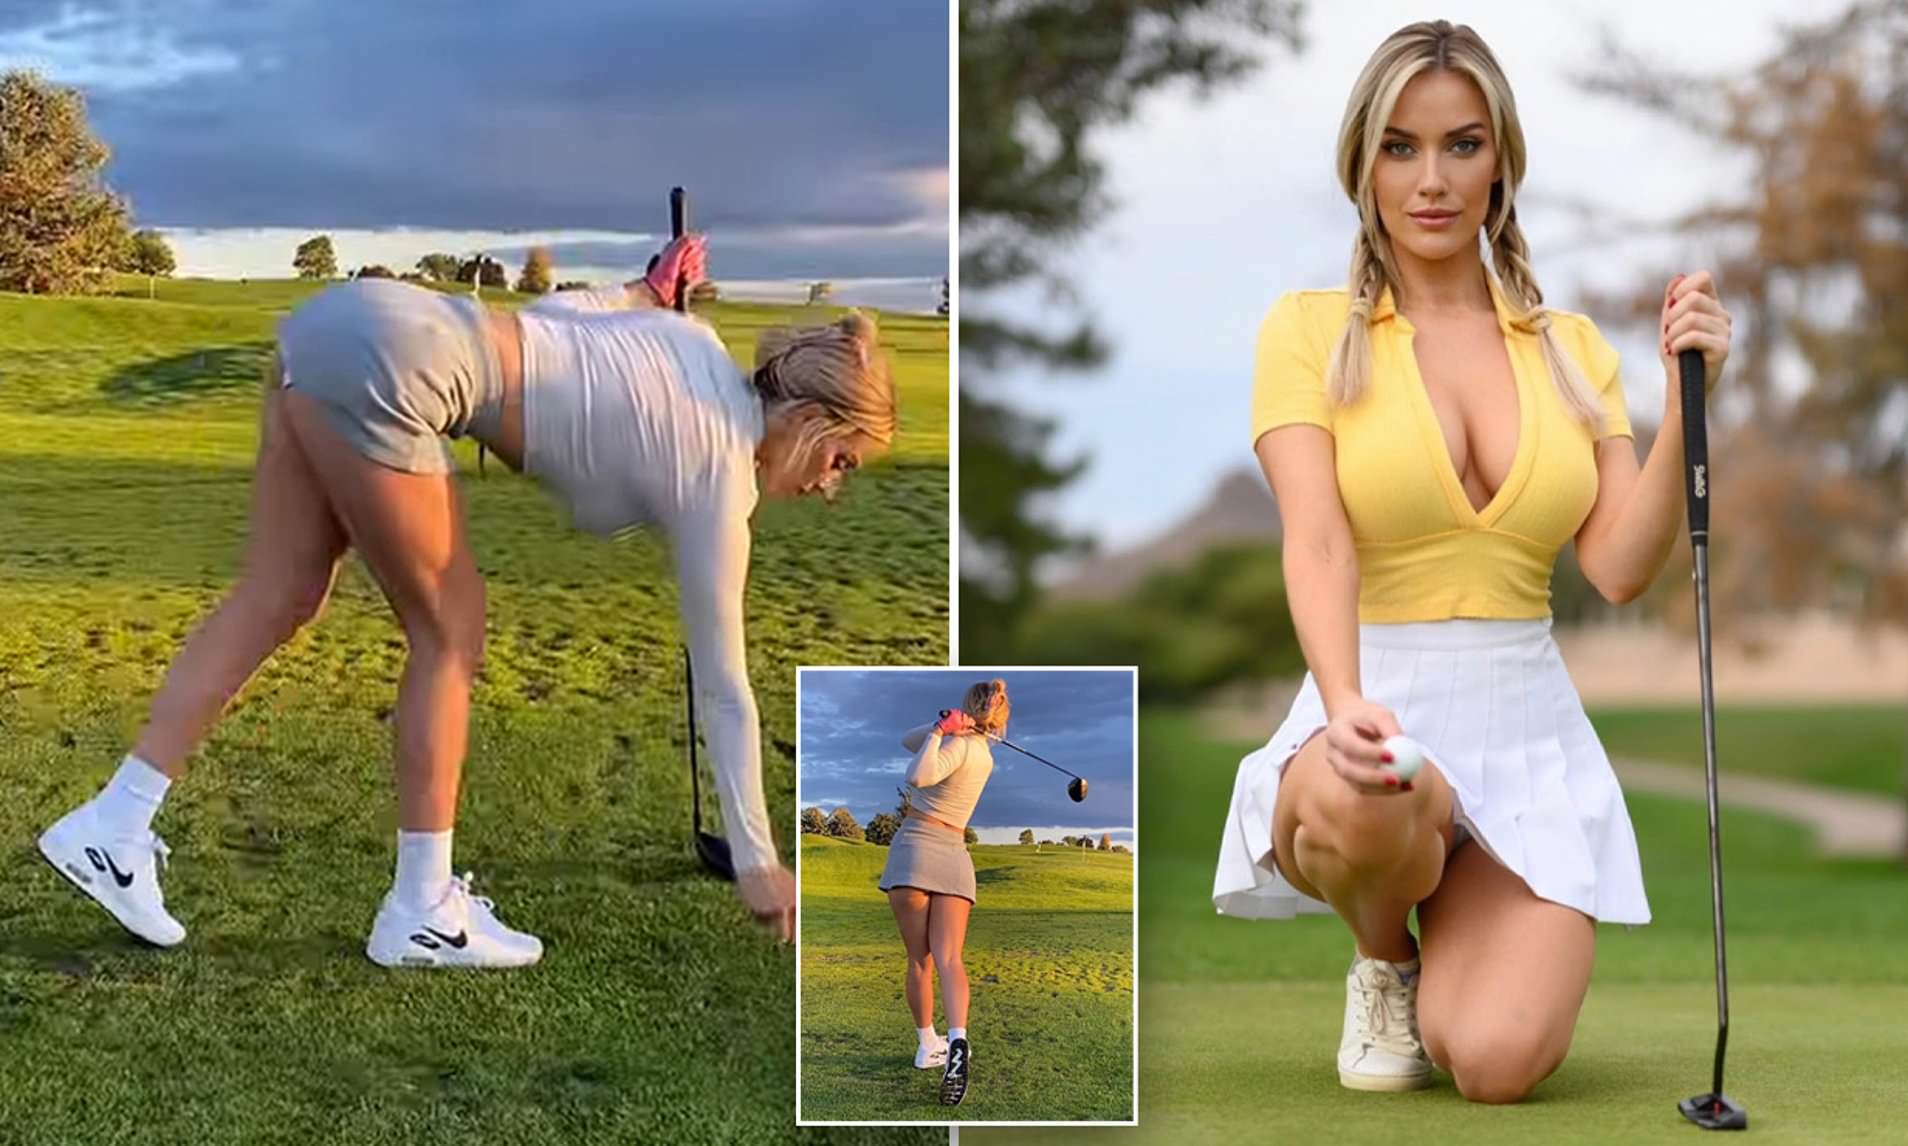 amir fayek recommends sexy women playing golf pic